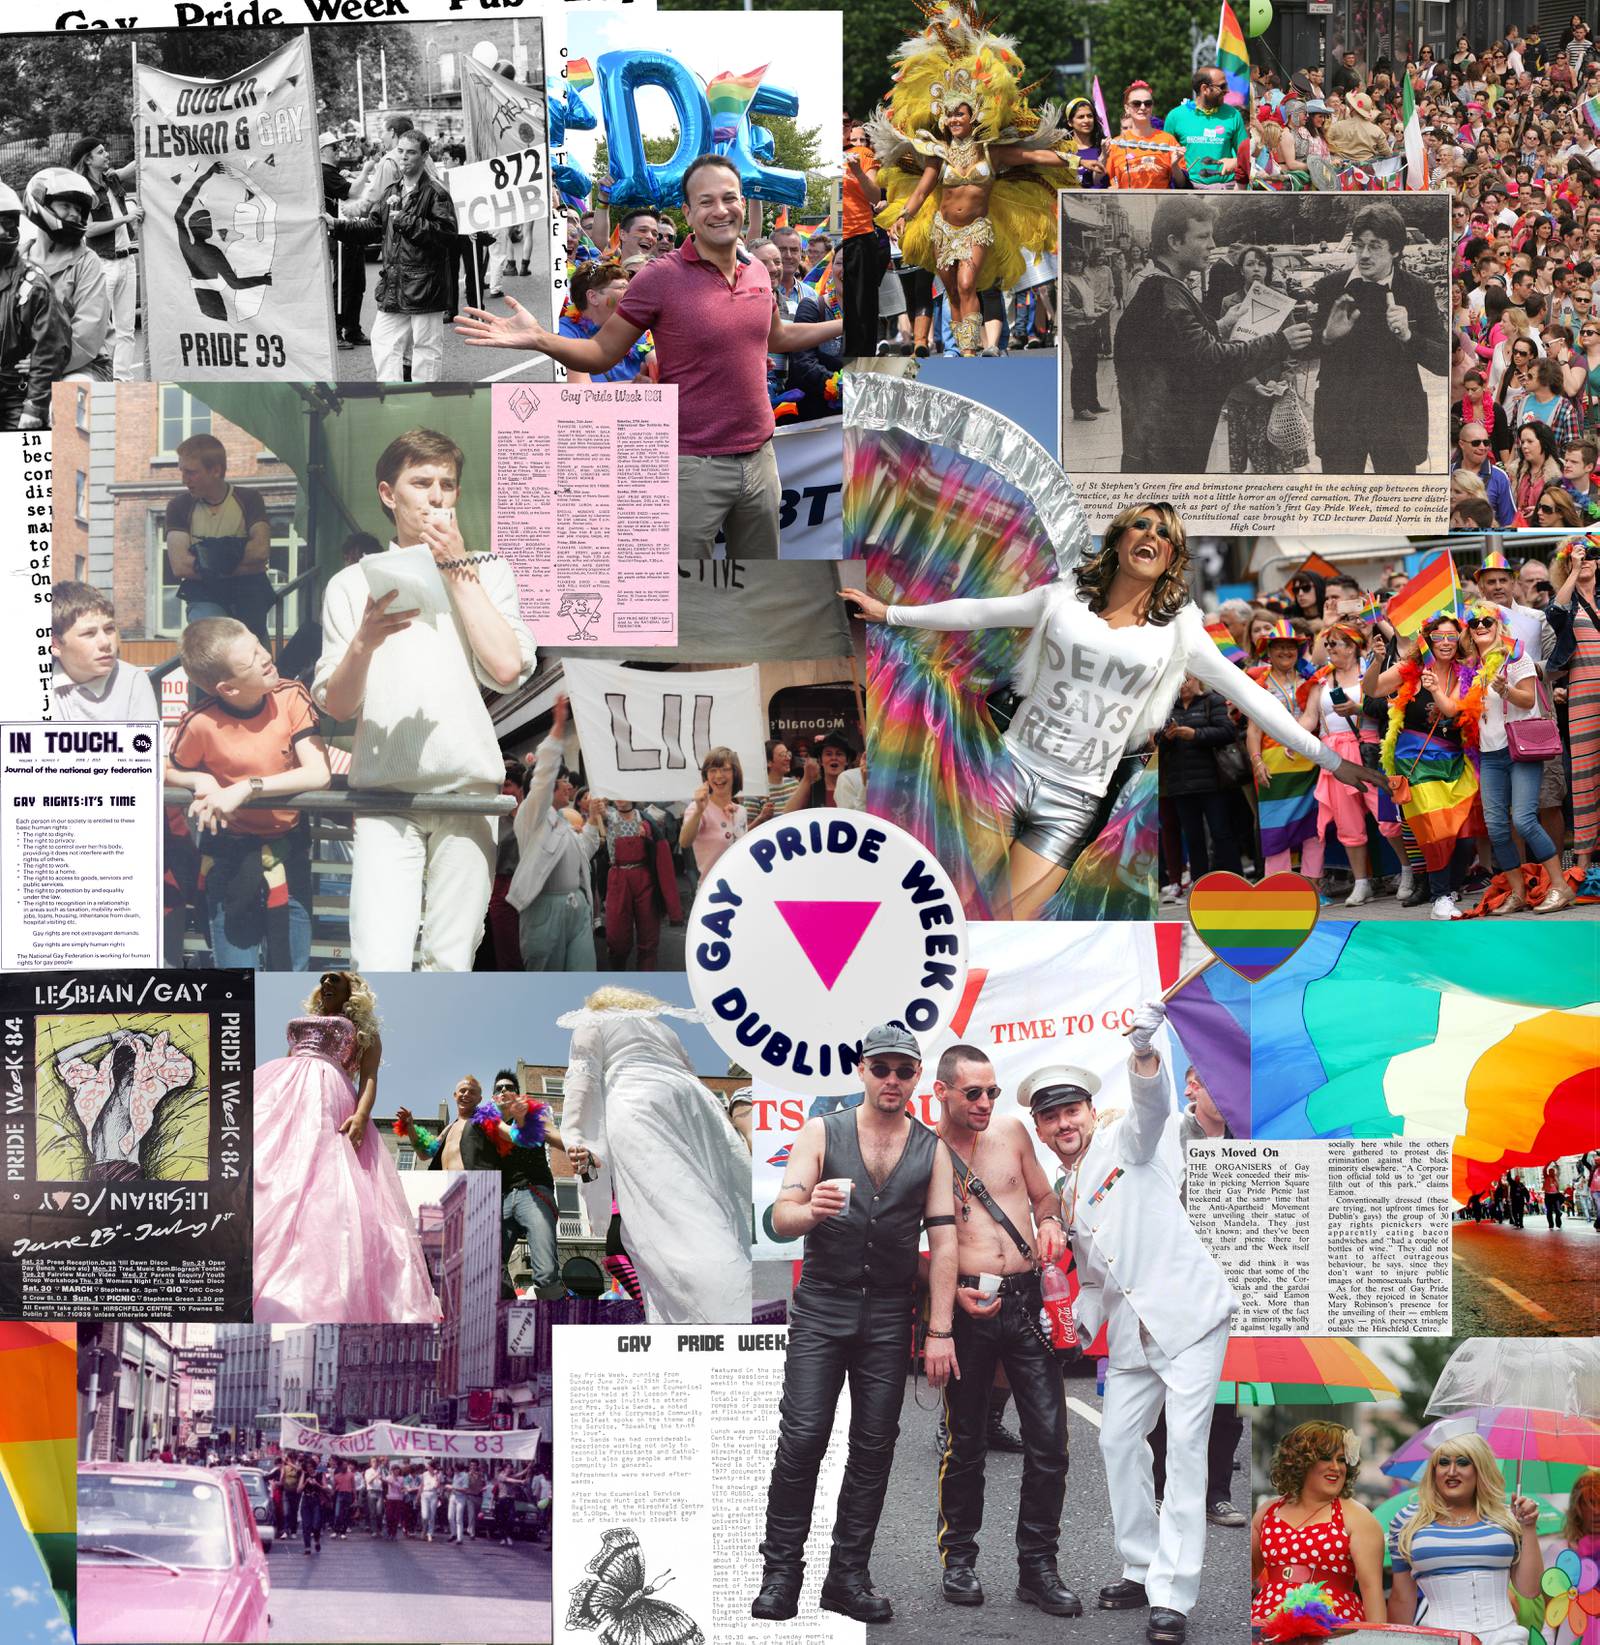 2023 marks the 40th anniversary of what many consider to be the first 'official' Pride march in Dublin in 1983